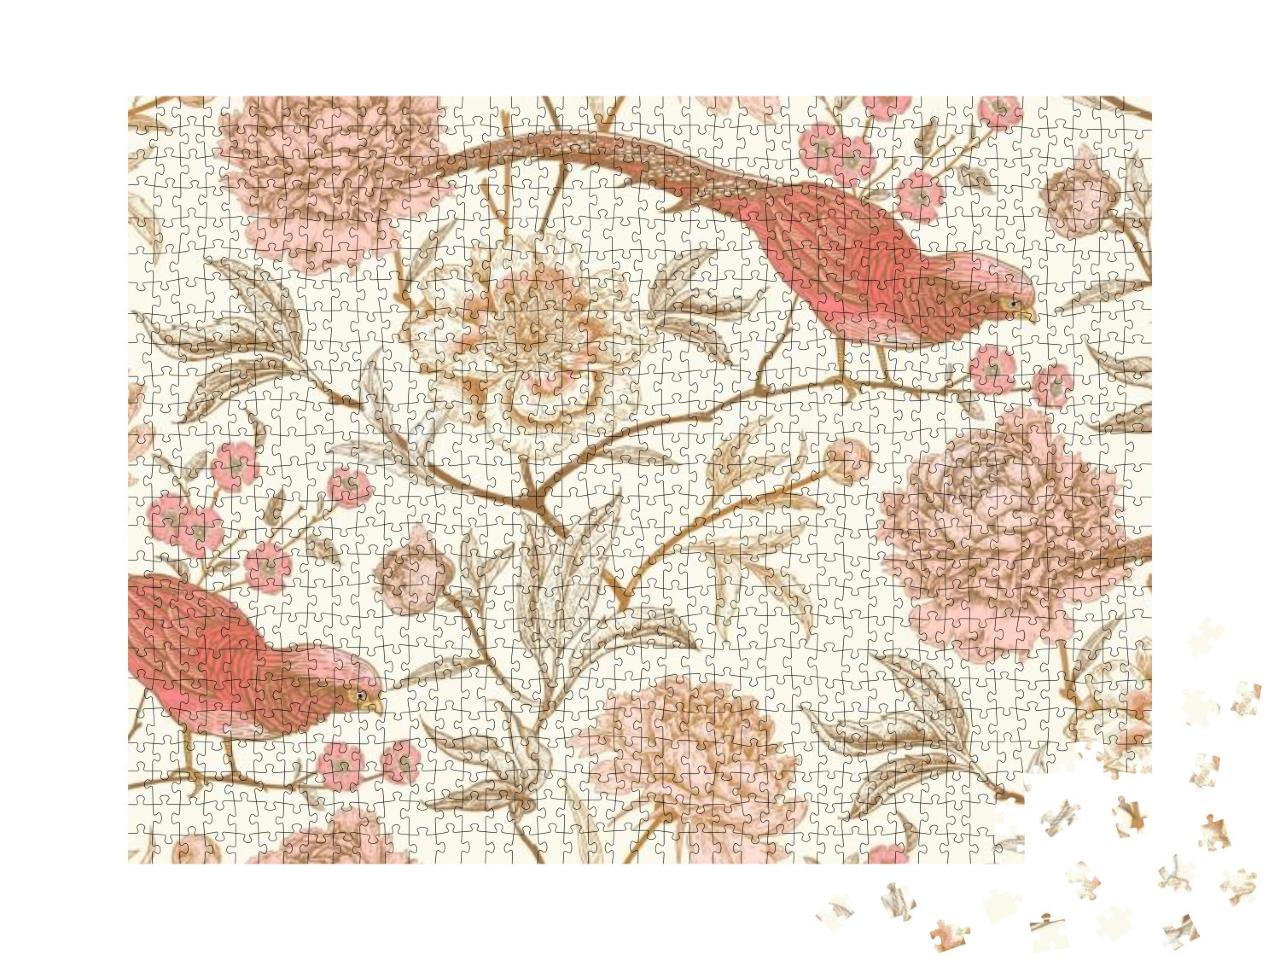 Peonies & Pheasants. Floral Vintage Seamless Pattern with... Jigsaw Puzzle with 1000 pieces